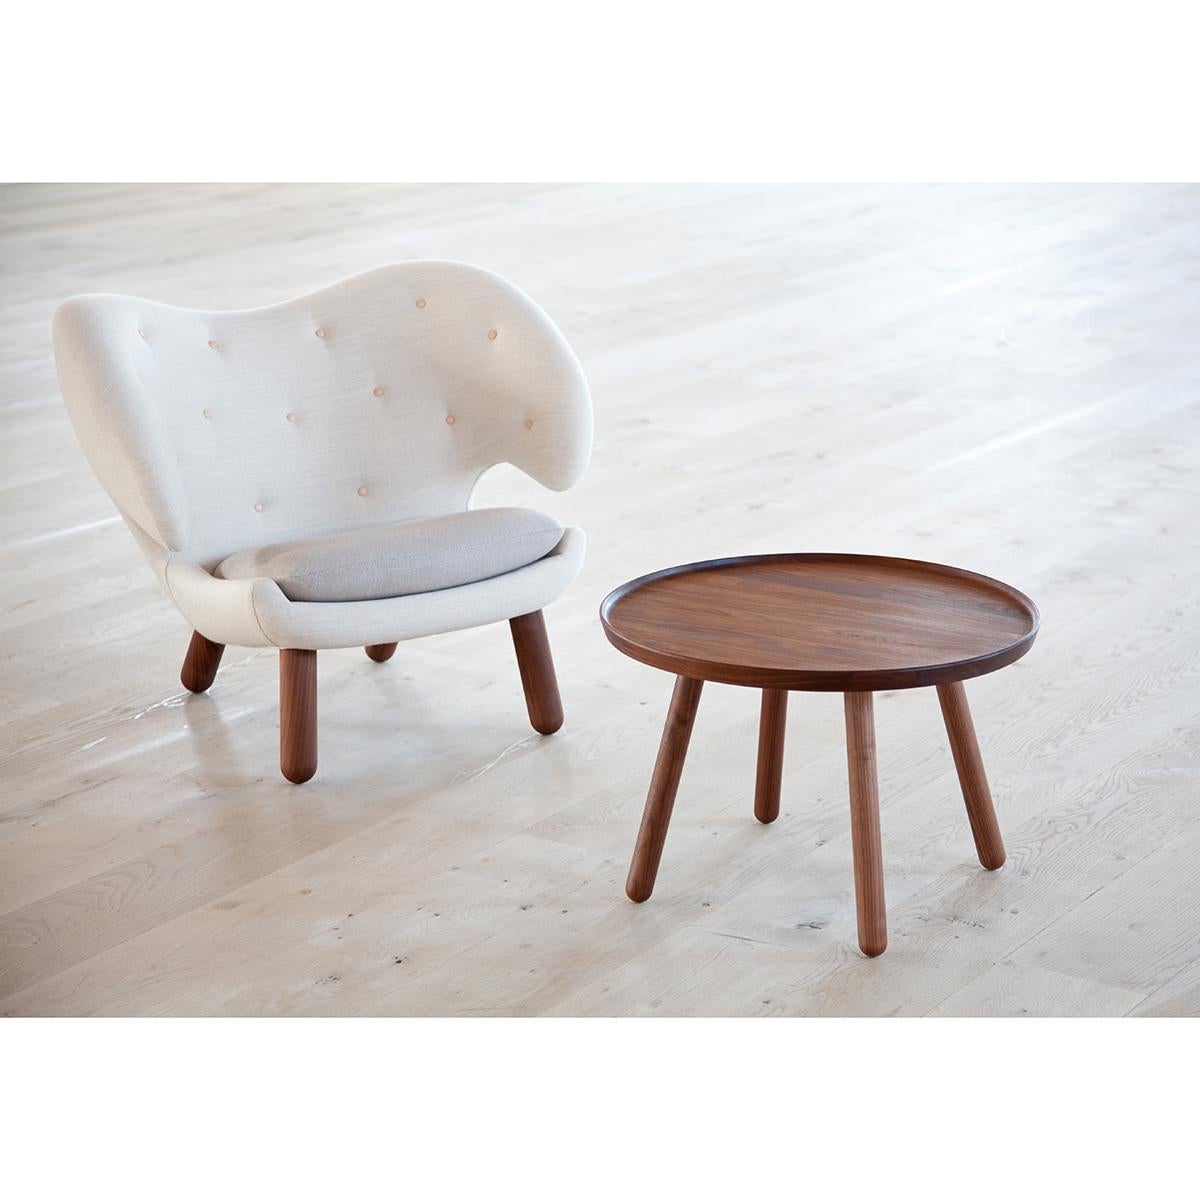 Contemporary Set of Pelican Chair in Wood and Fabric and Pelican Table by Finn Juhl